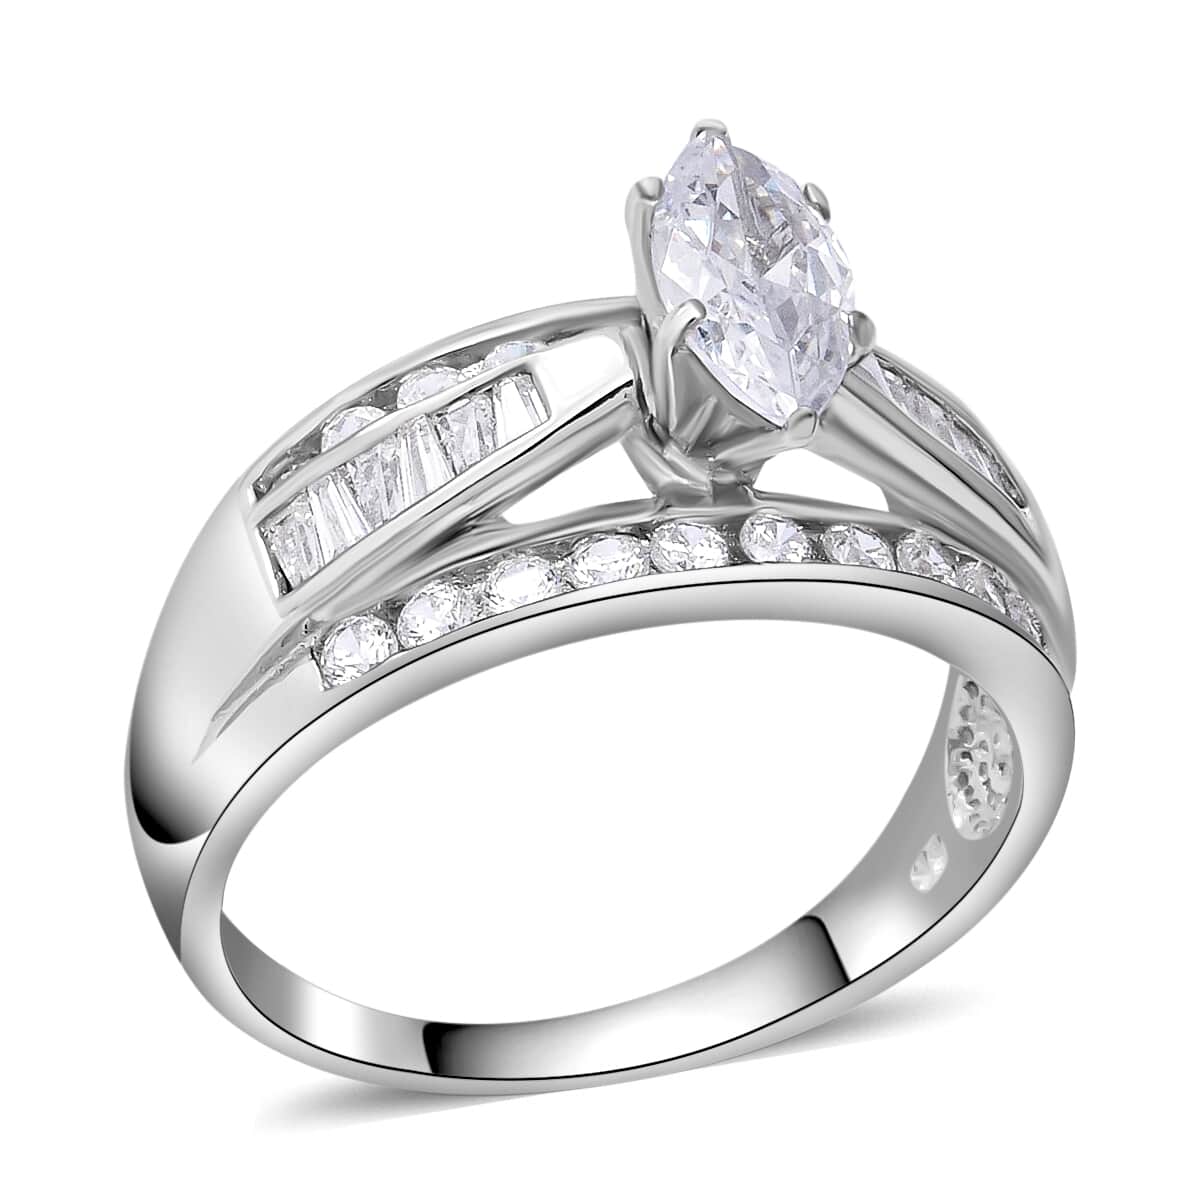 Buy Simulated Diamond Ring in Sterling Silver, Fashion Rings For